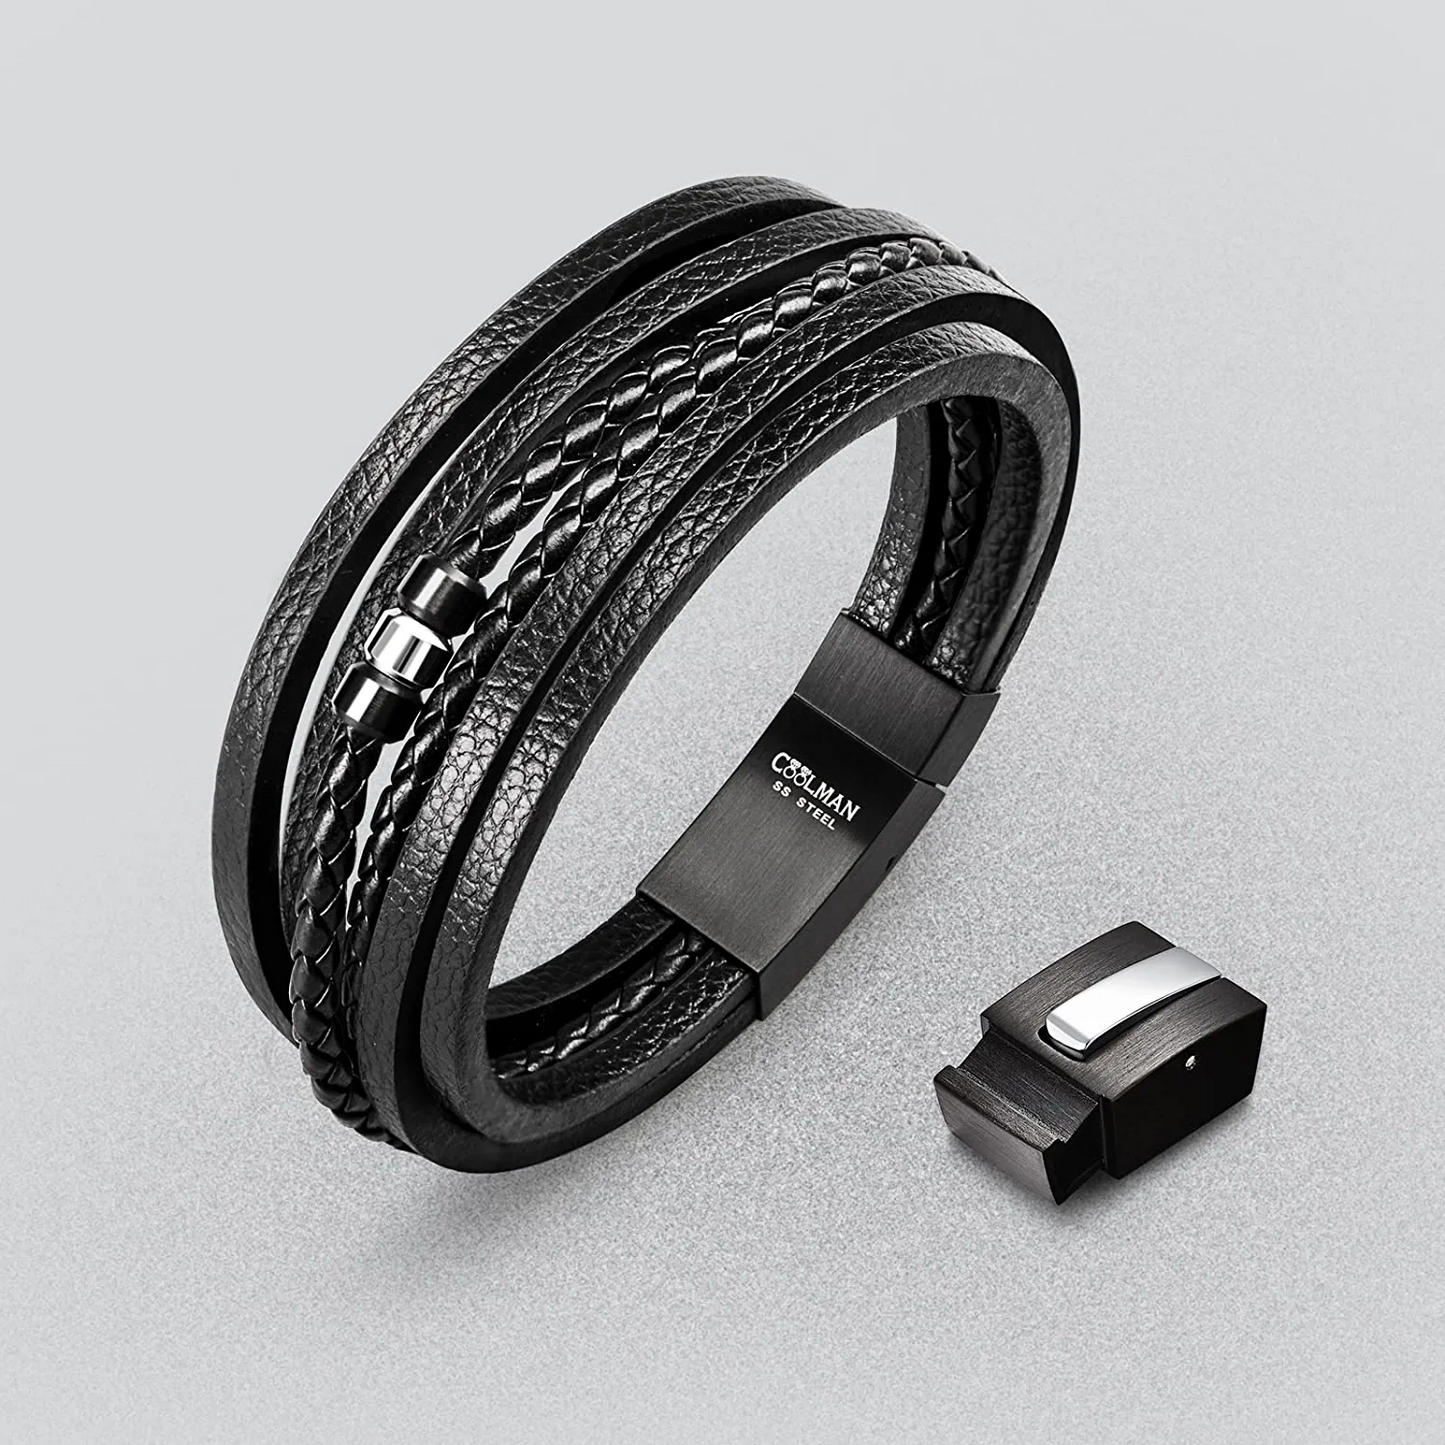 Coolman Leather Bracelet for Men Stainless Steel Braided Cuff Bracelet with Carbon Fibre Bead Magnetic Clasp